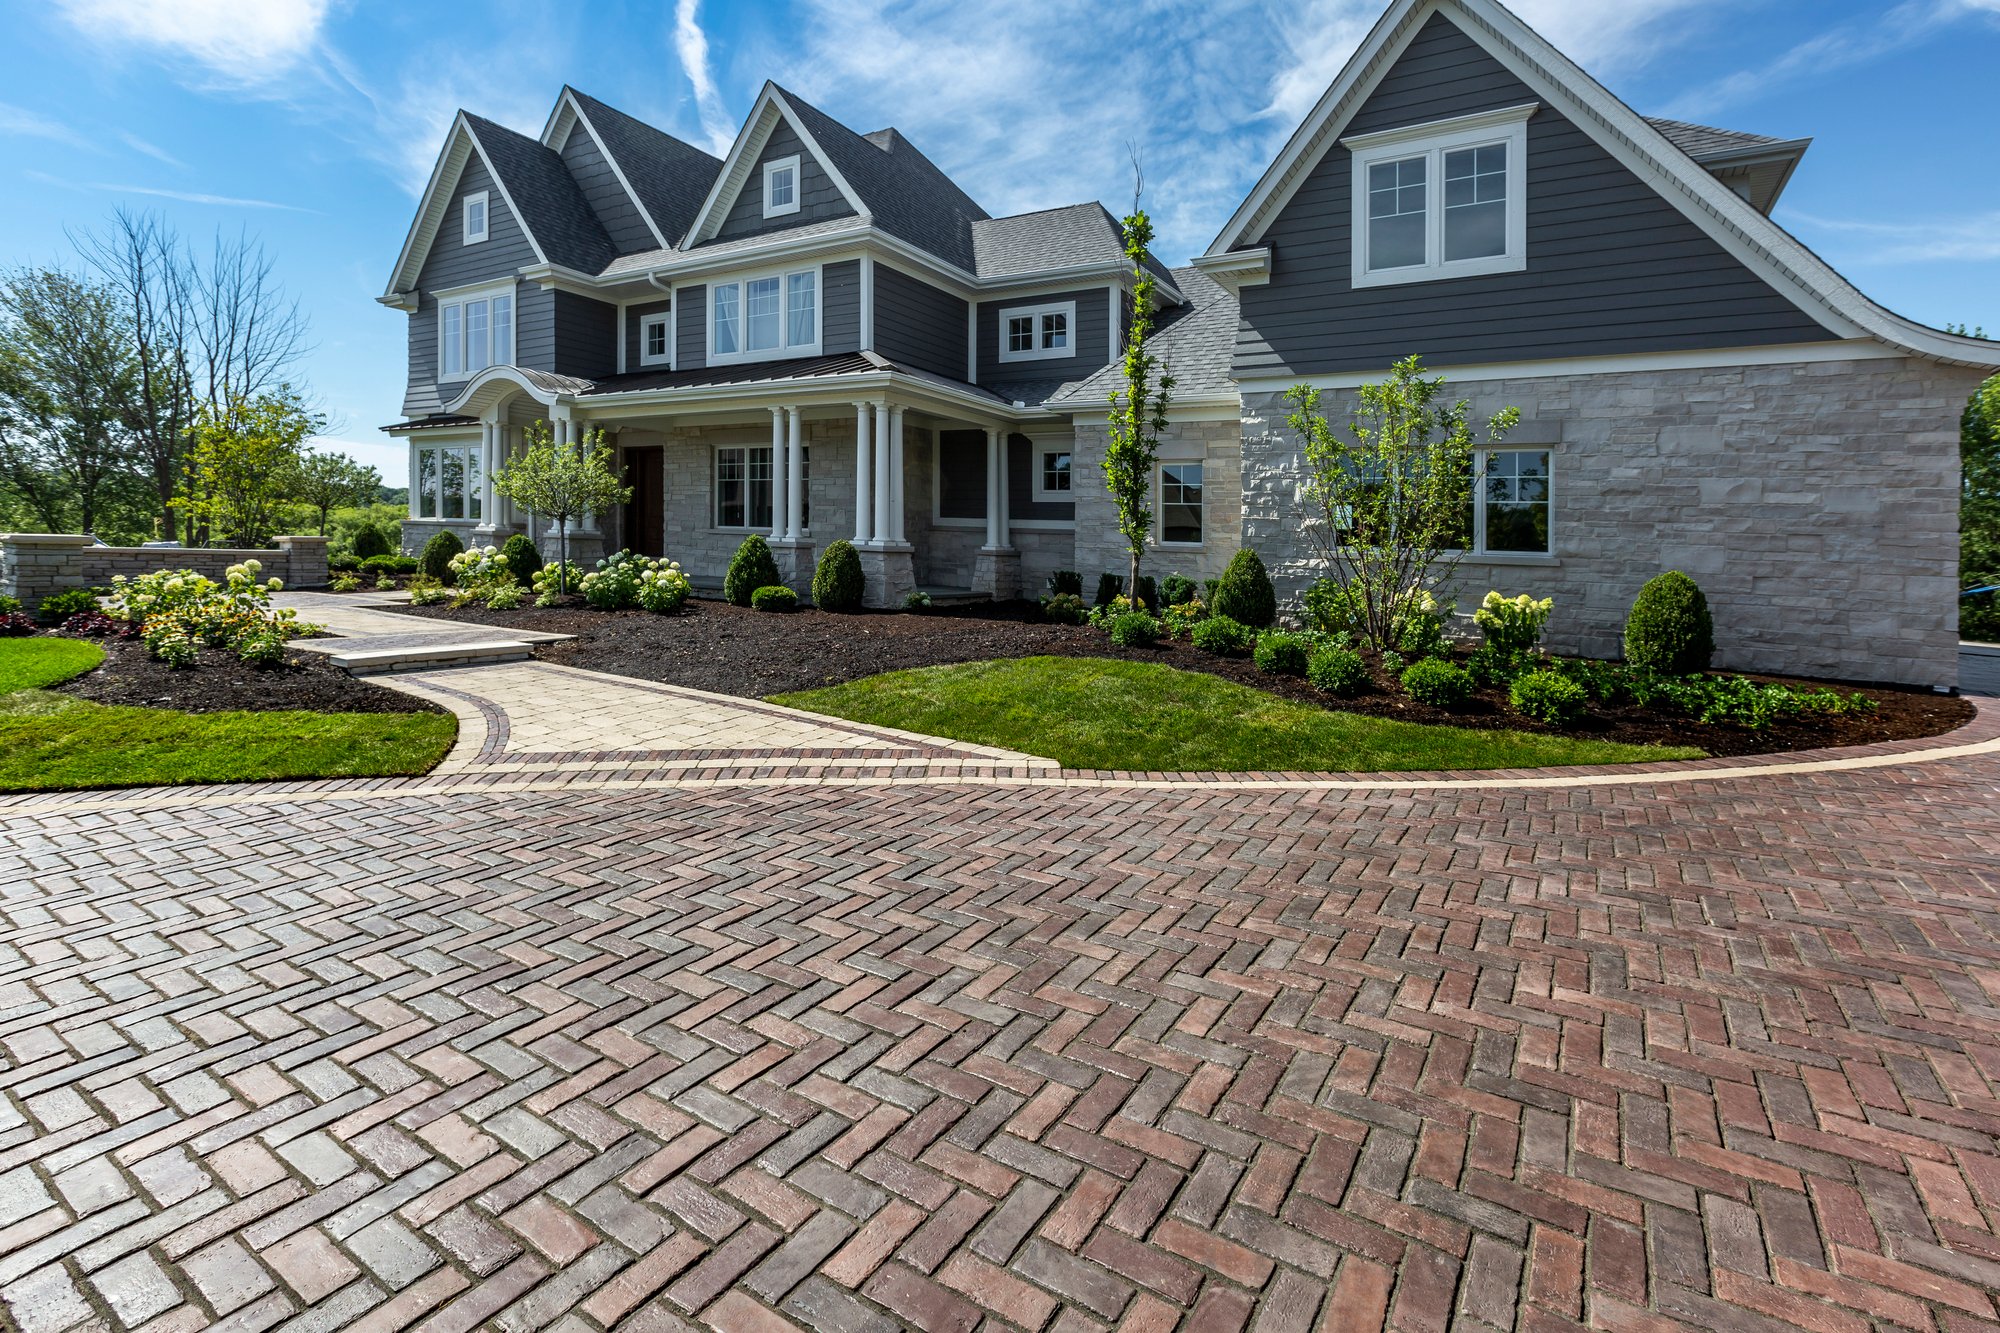 Unilock pavers in Lehigh Valley, PA